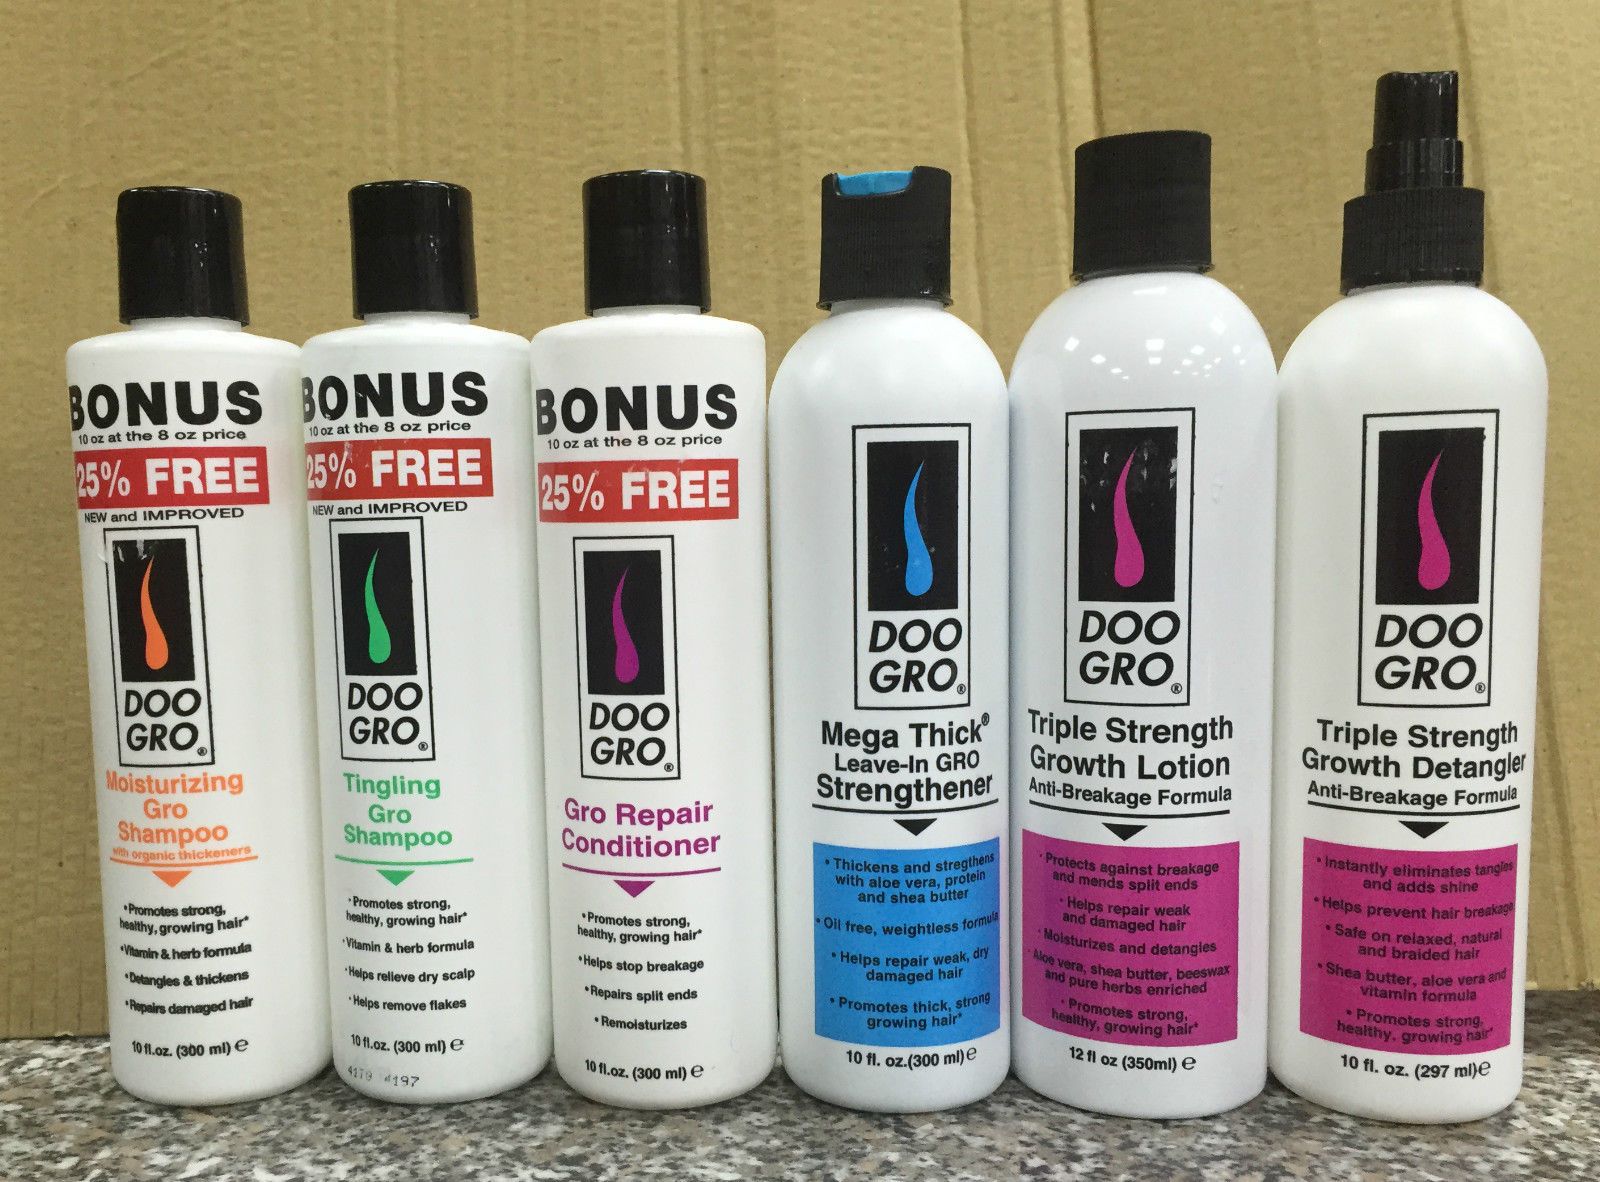 Doo Gro Hair growth Products Reviews for Natural Hair